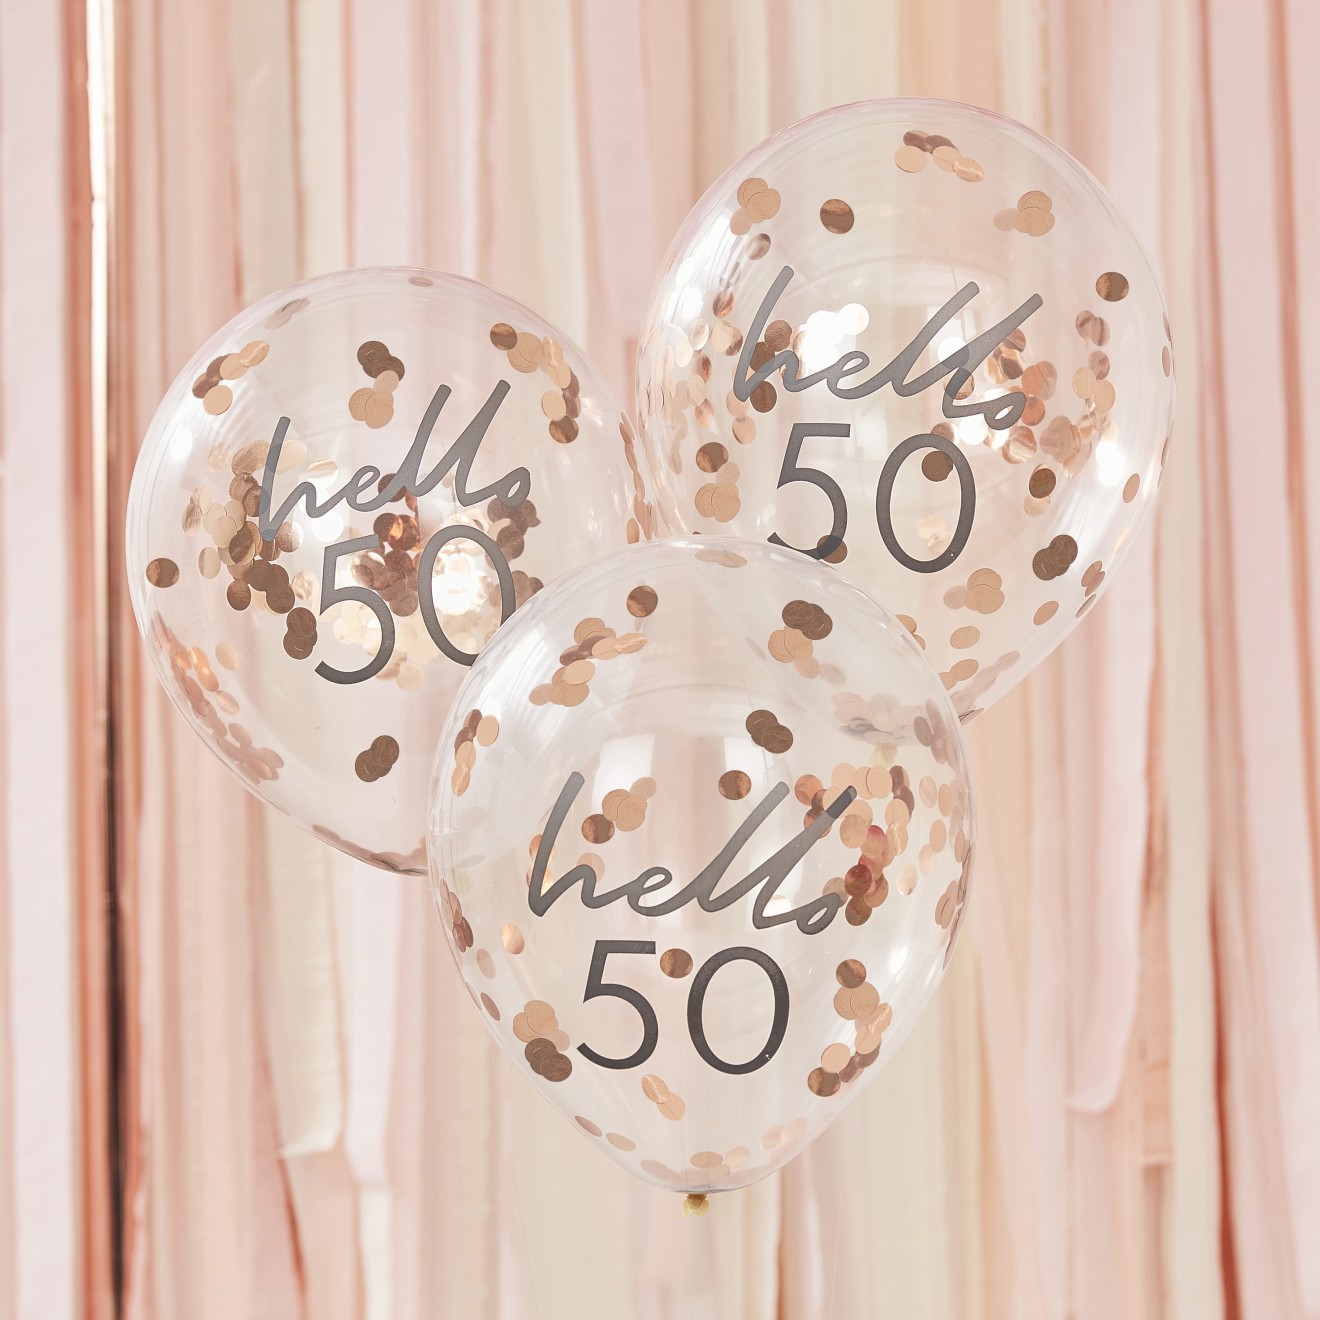 5 Rose Gold Confetti Filled 'Hello 50' Balloons